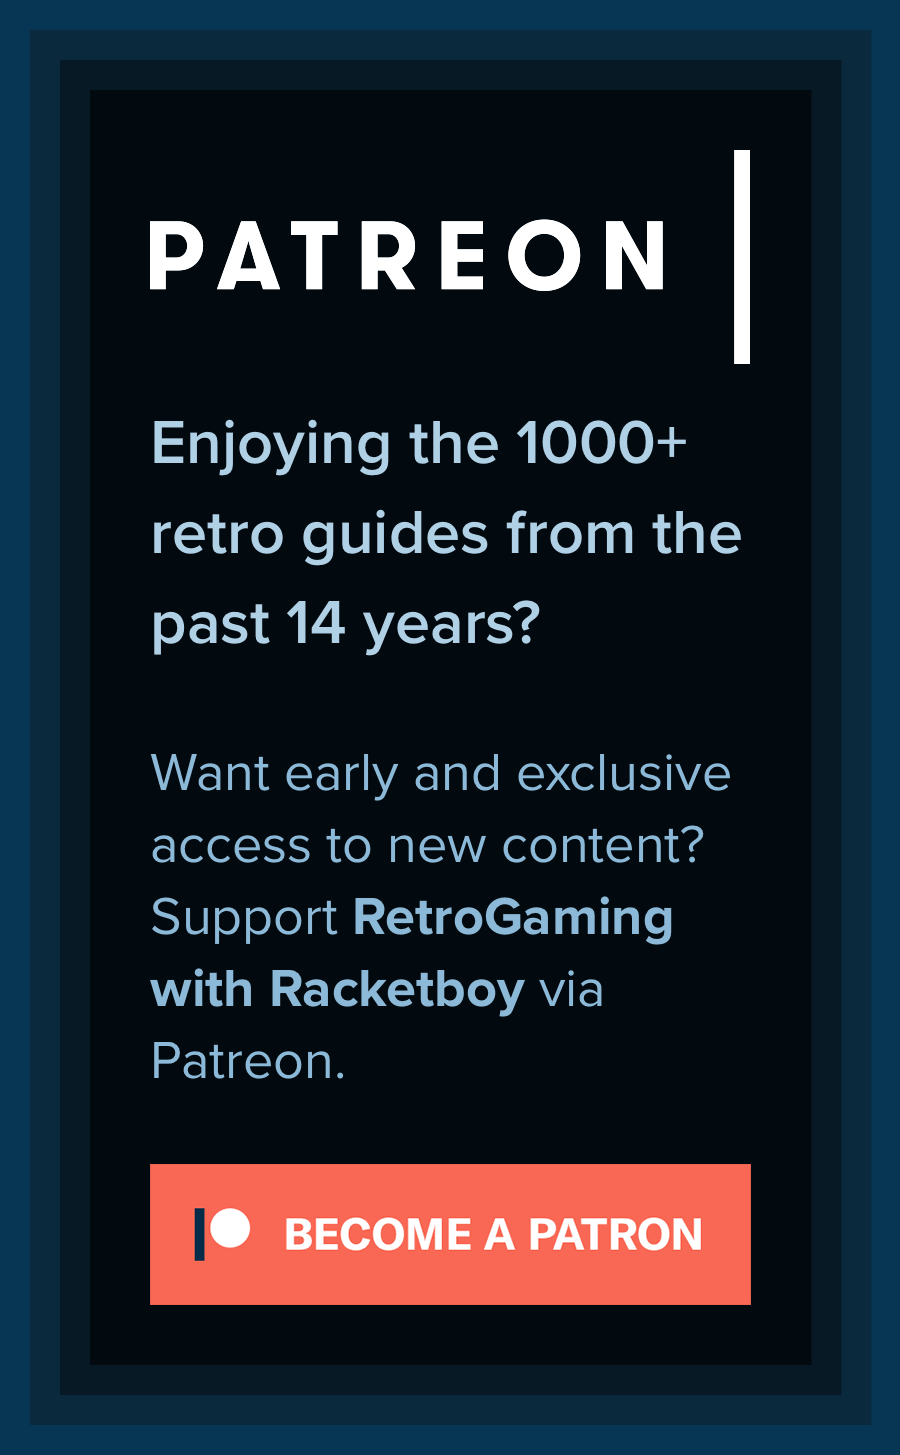 Support RetroGaming with Racketboy via Patreon